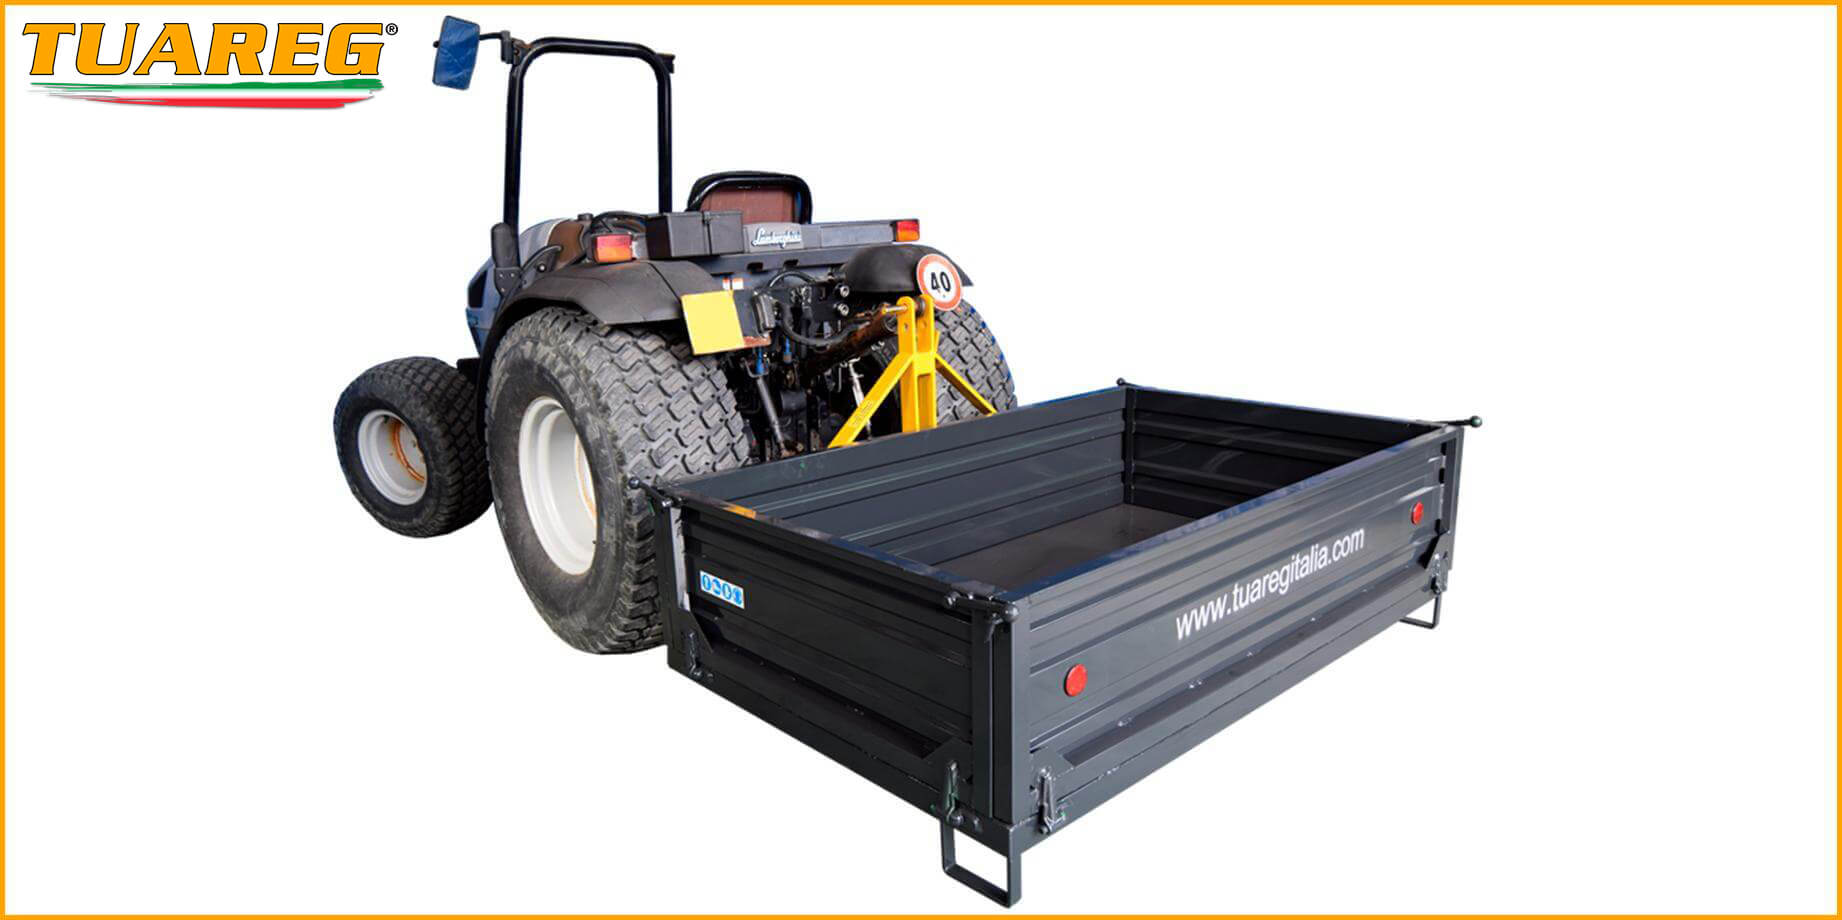 Loading Box - Tuareg - Tractor towed equipment for beach cleaning